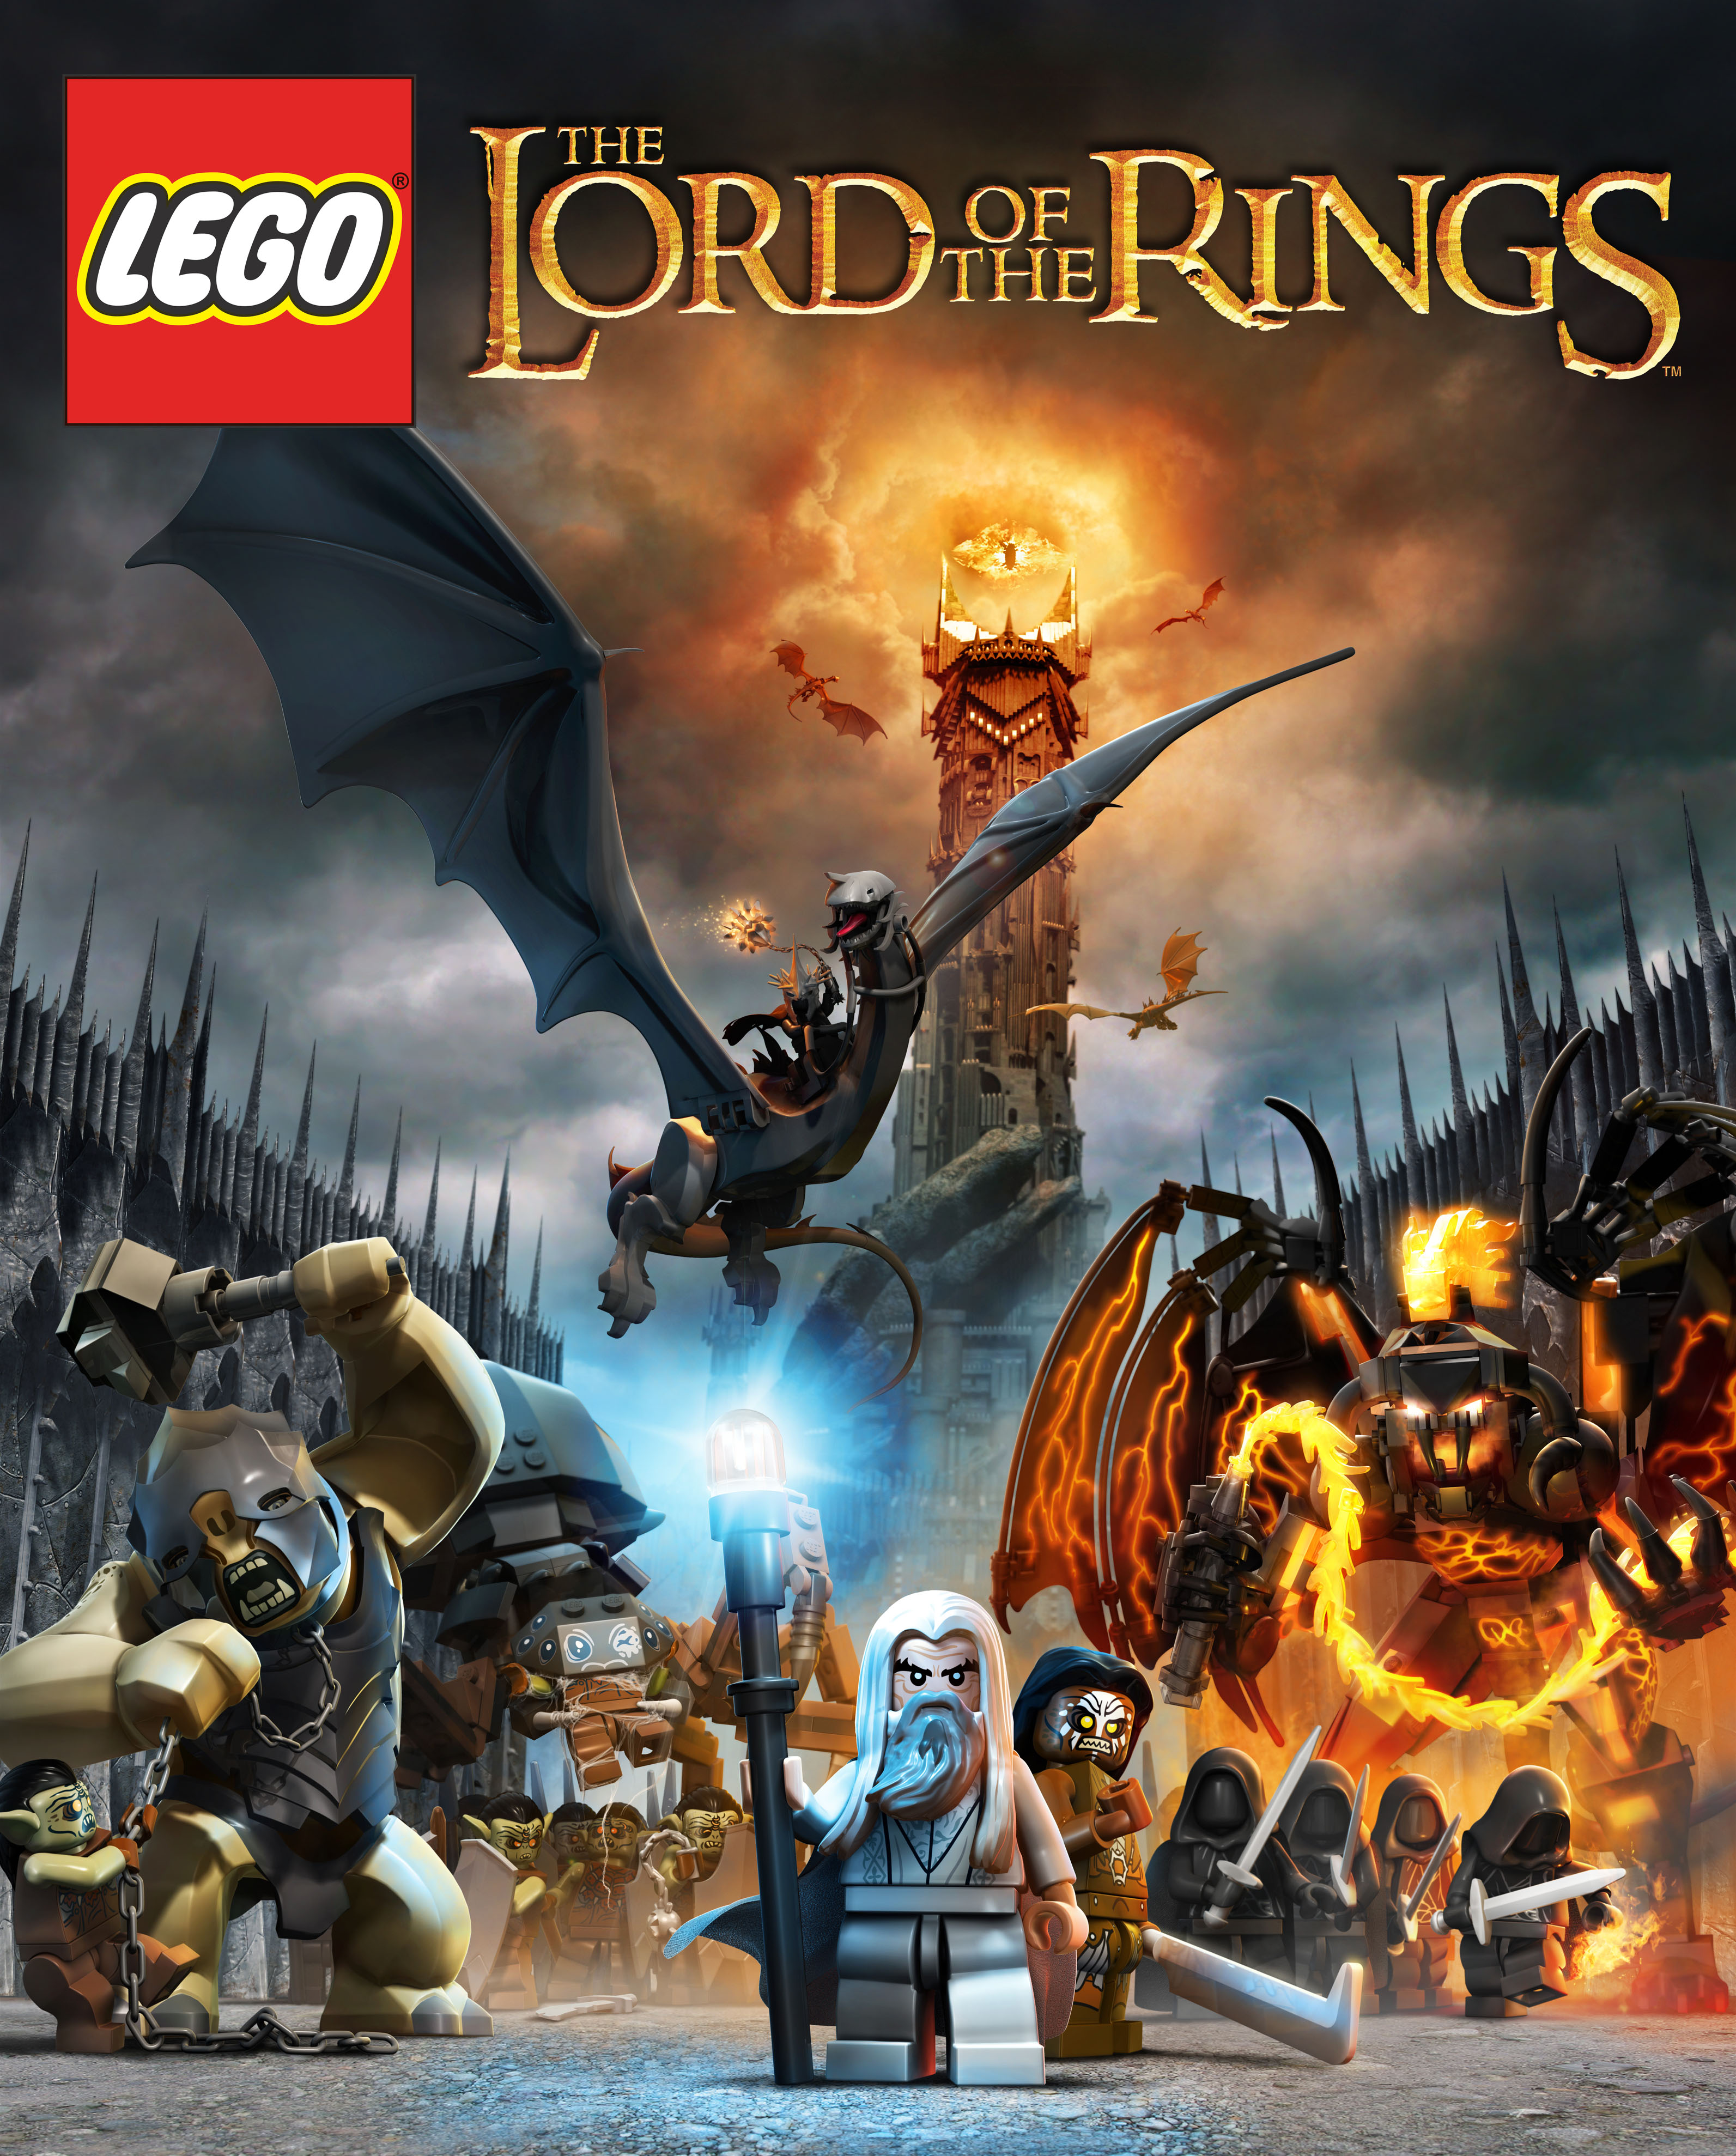 The Best Lord Rings & Hobbit Sets - LEGO Reviews & Videos